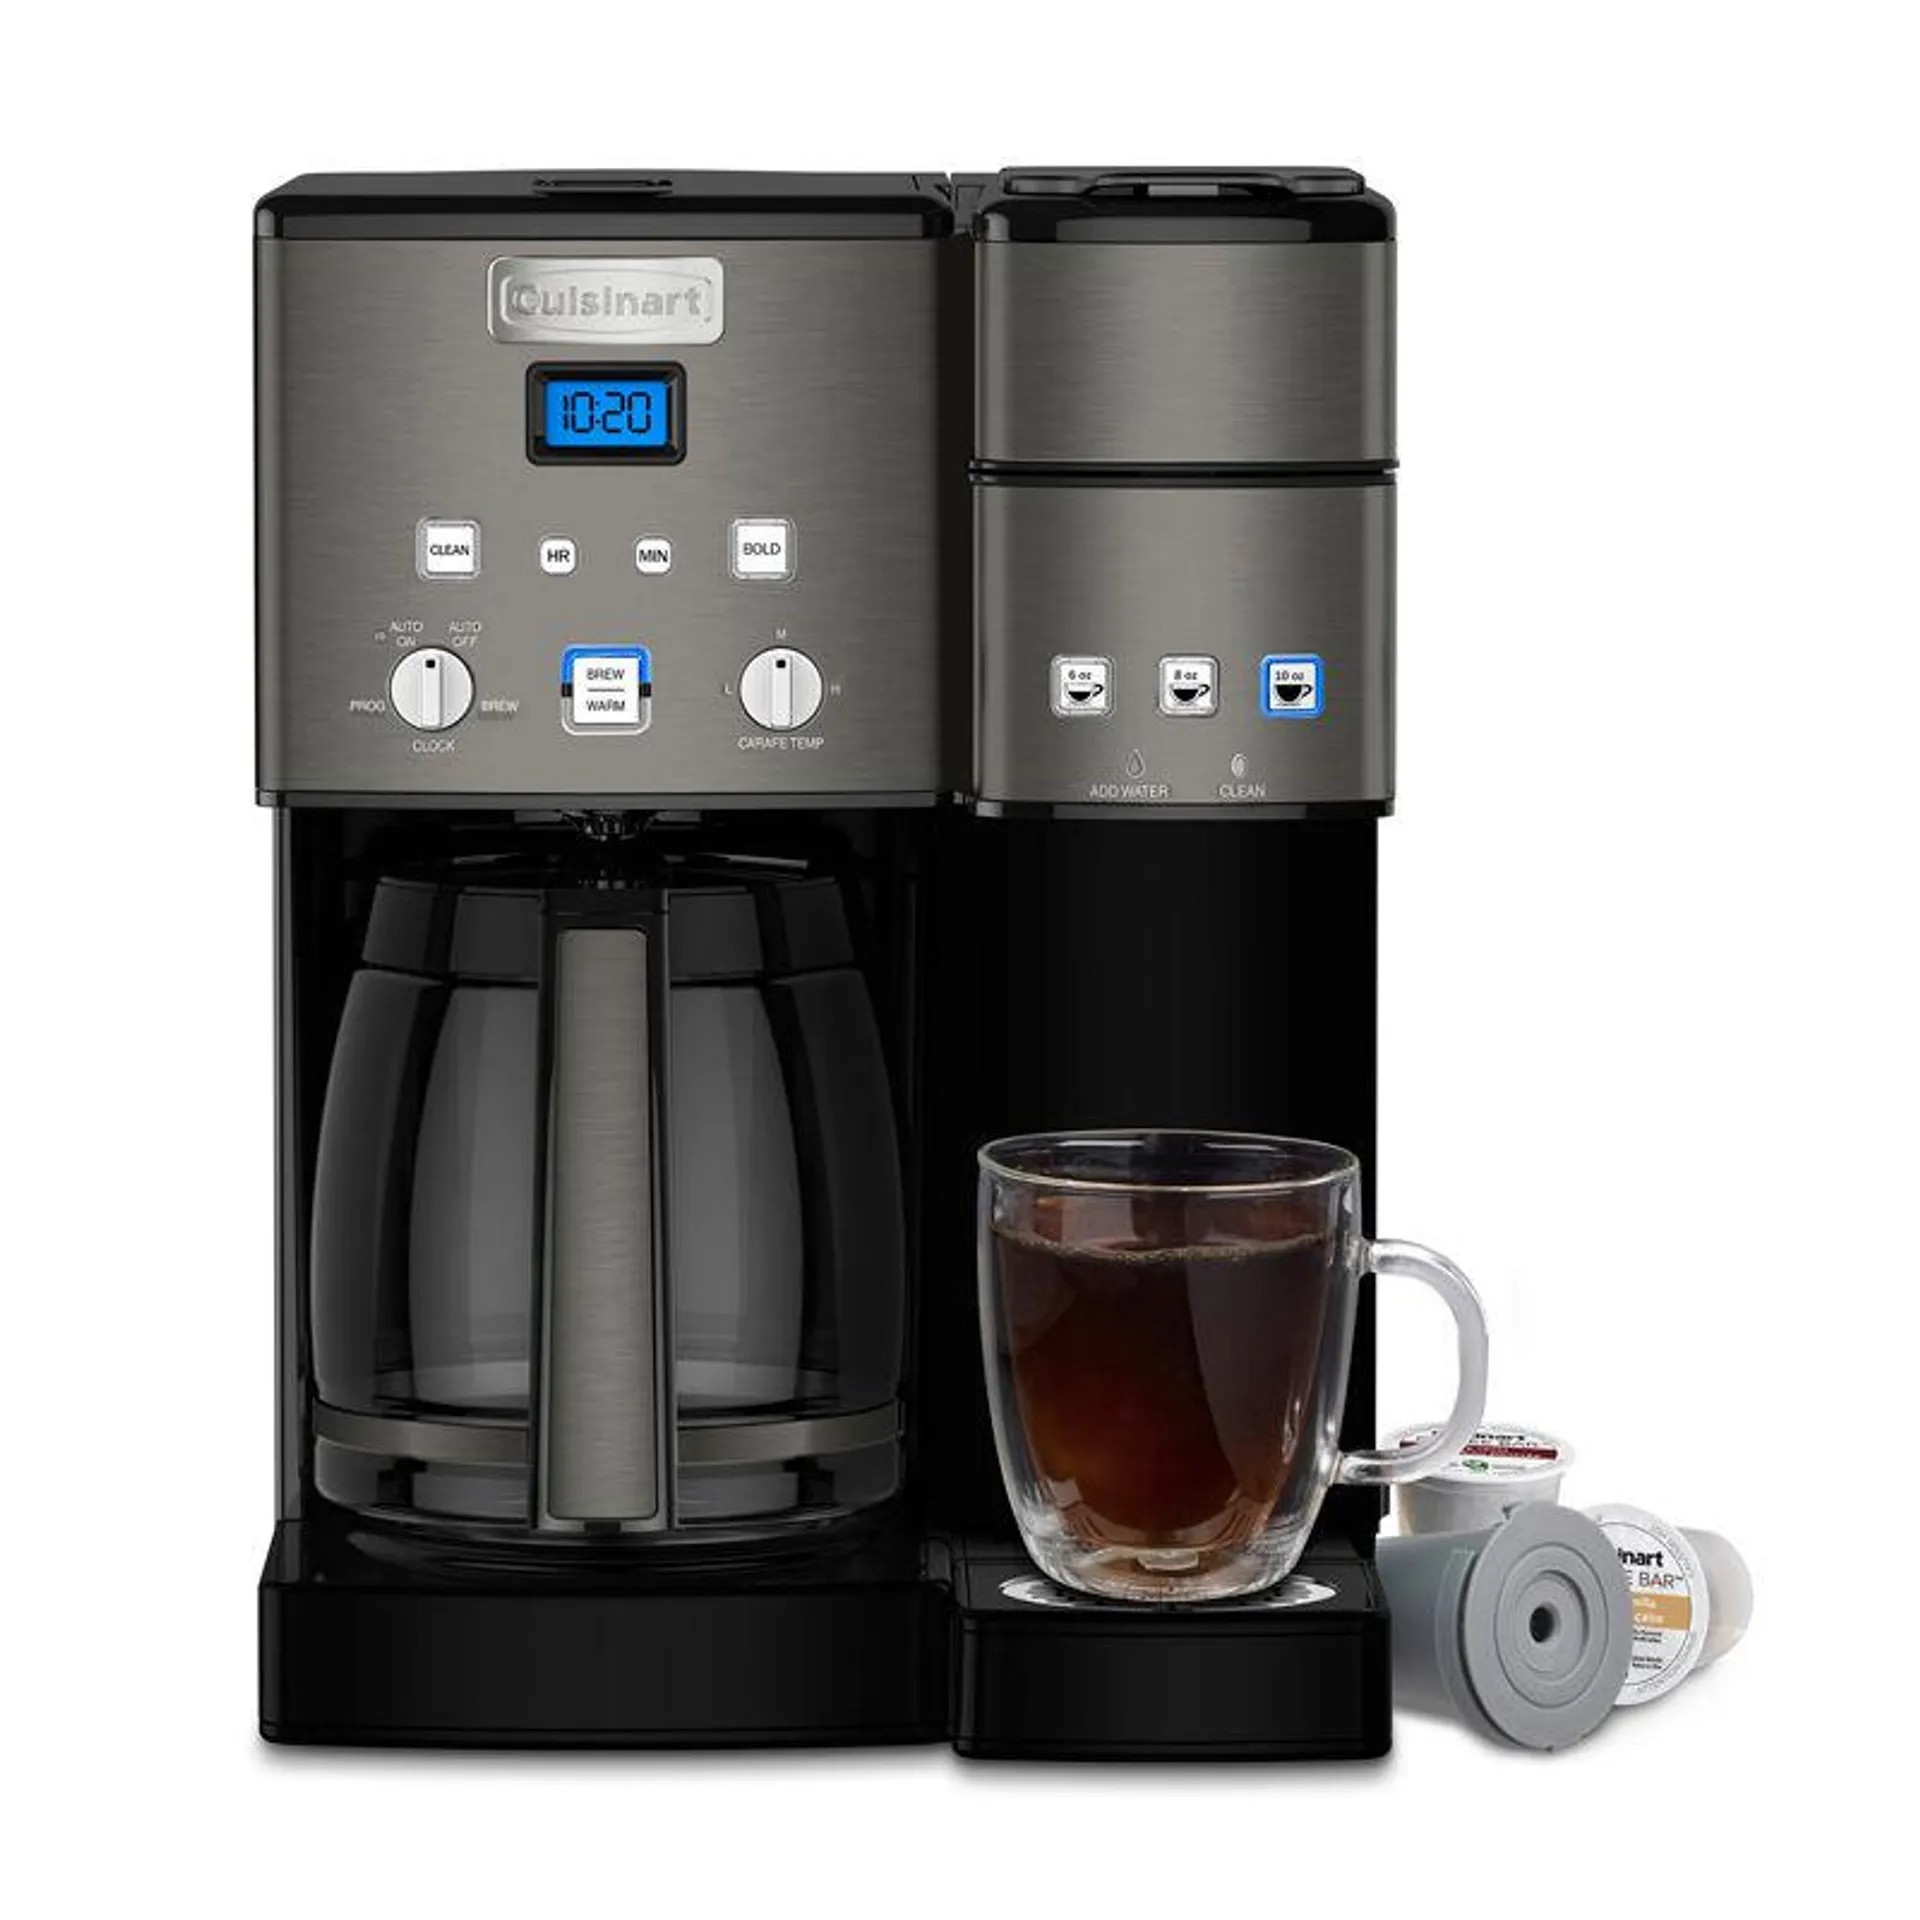 Cuisinart Coffee Center 12 Cup Coffeemaker and Single-Serve Brewer - Black Stainless